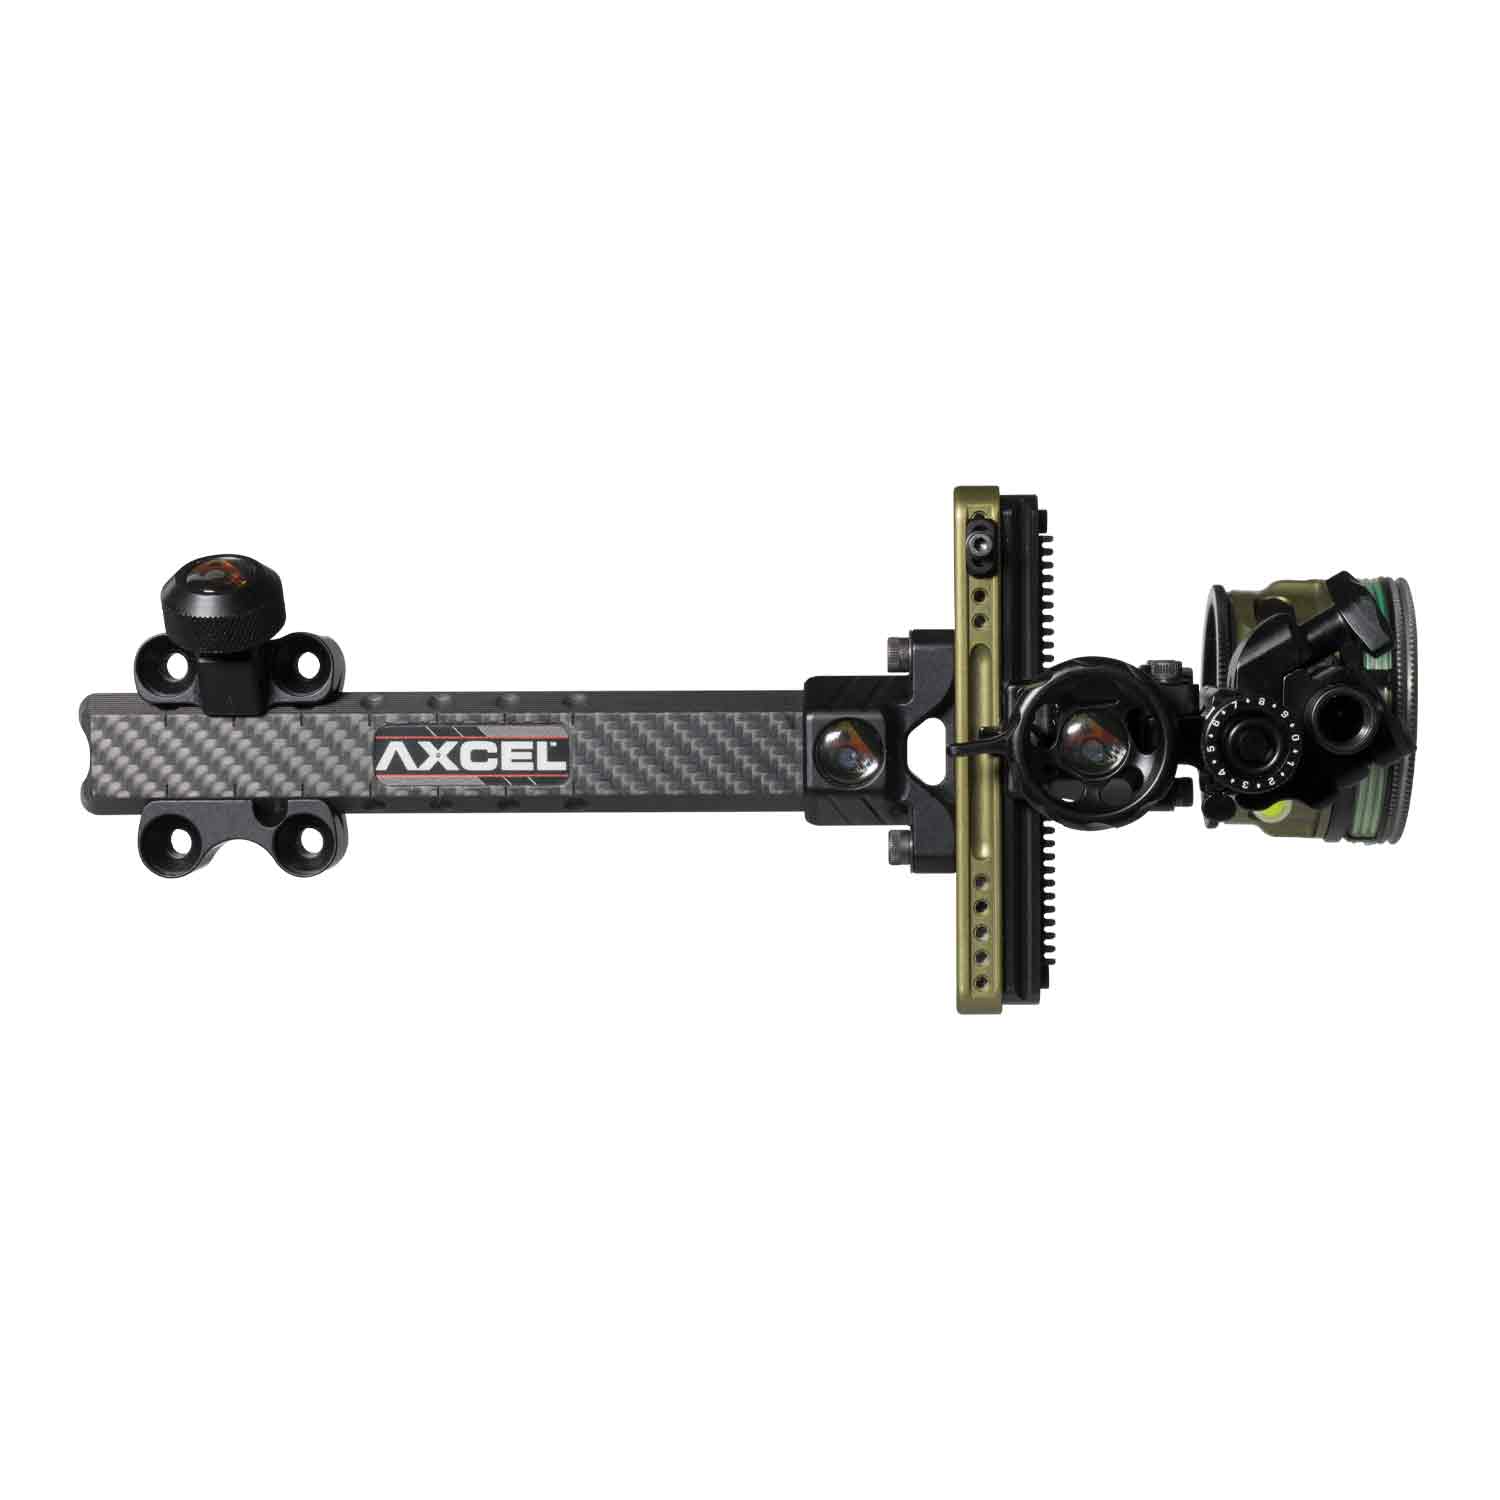 Axcel Landslyde Tactical Bowhunting Carbon Pro Slider Sight w/AVX-41 Scope (.010” green/red double pin Ranger sight)